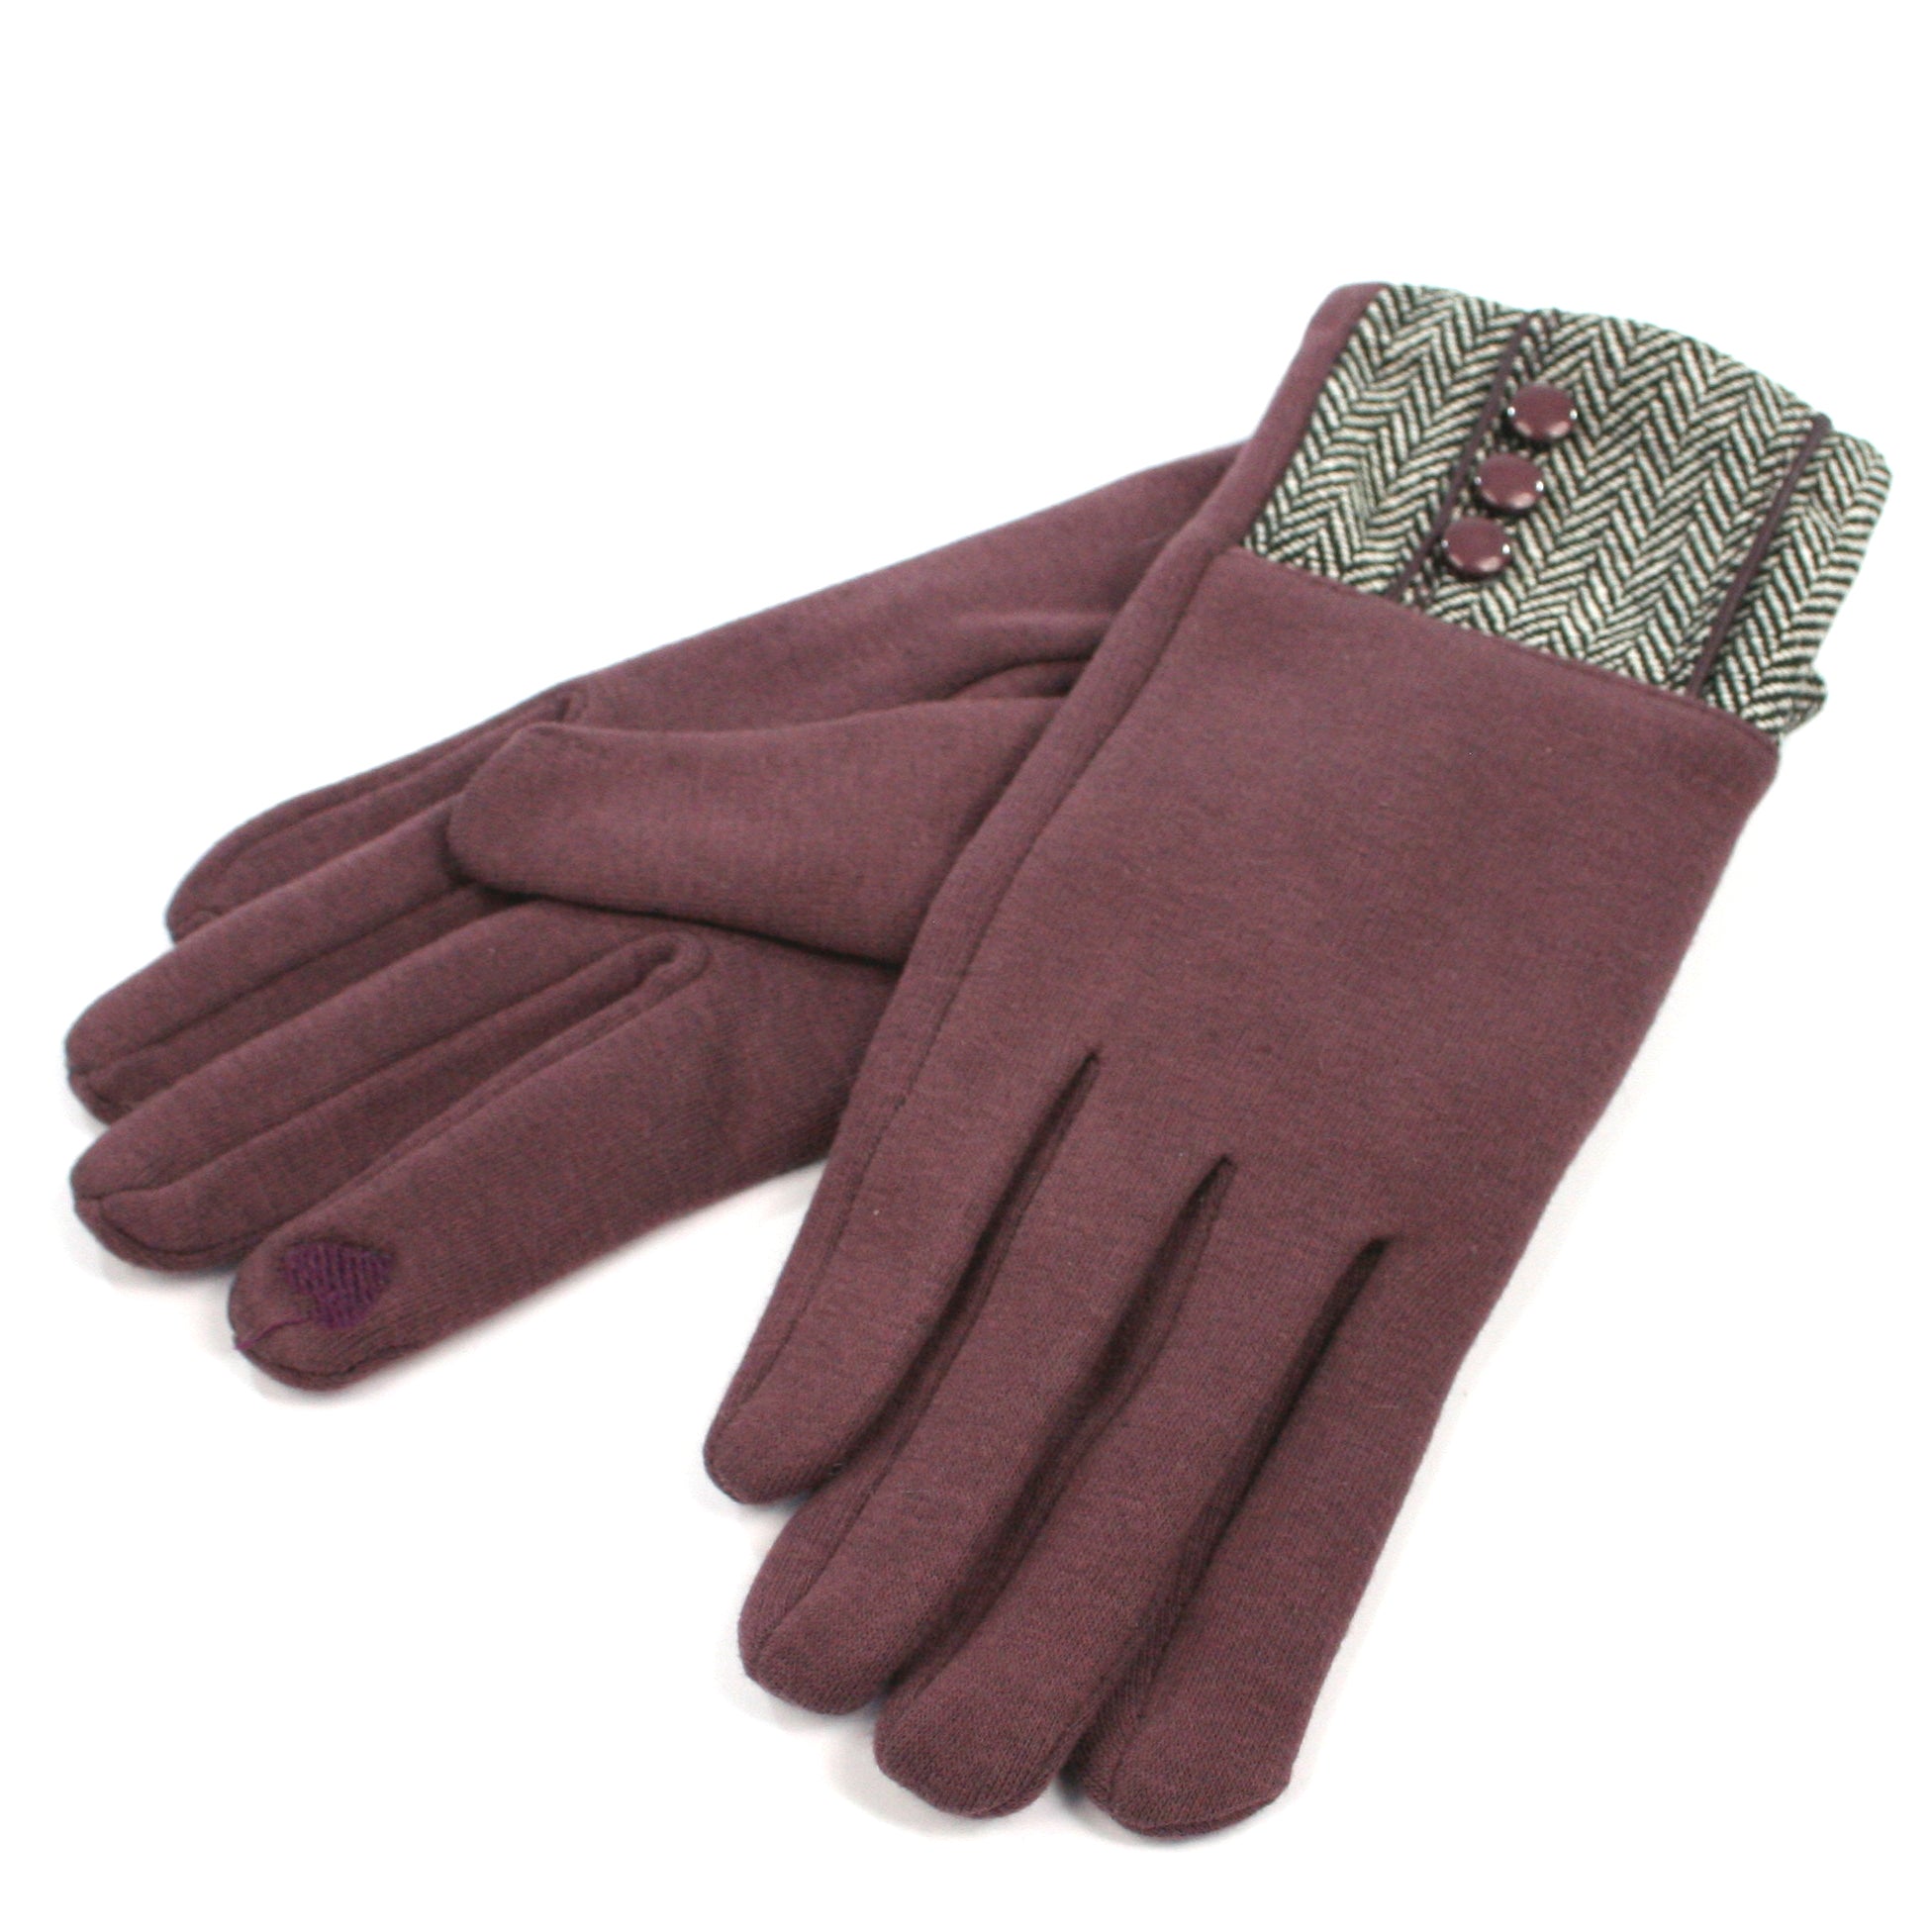 soft ladies gloves with herringbone and button detailing